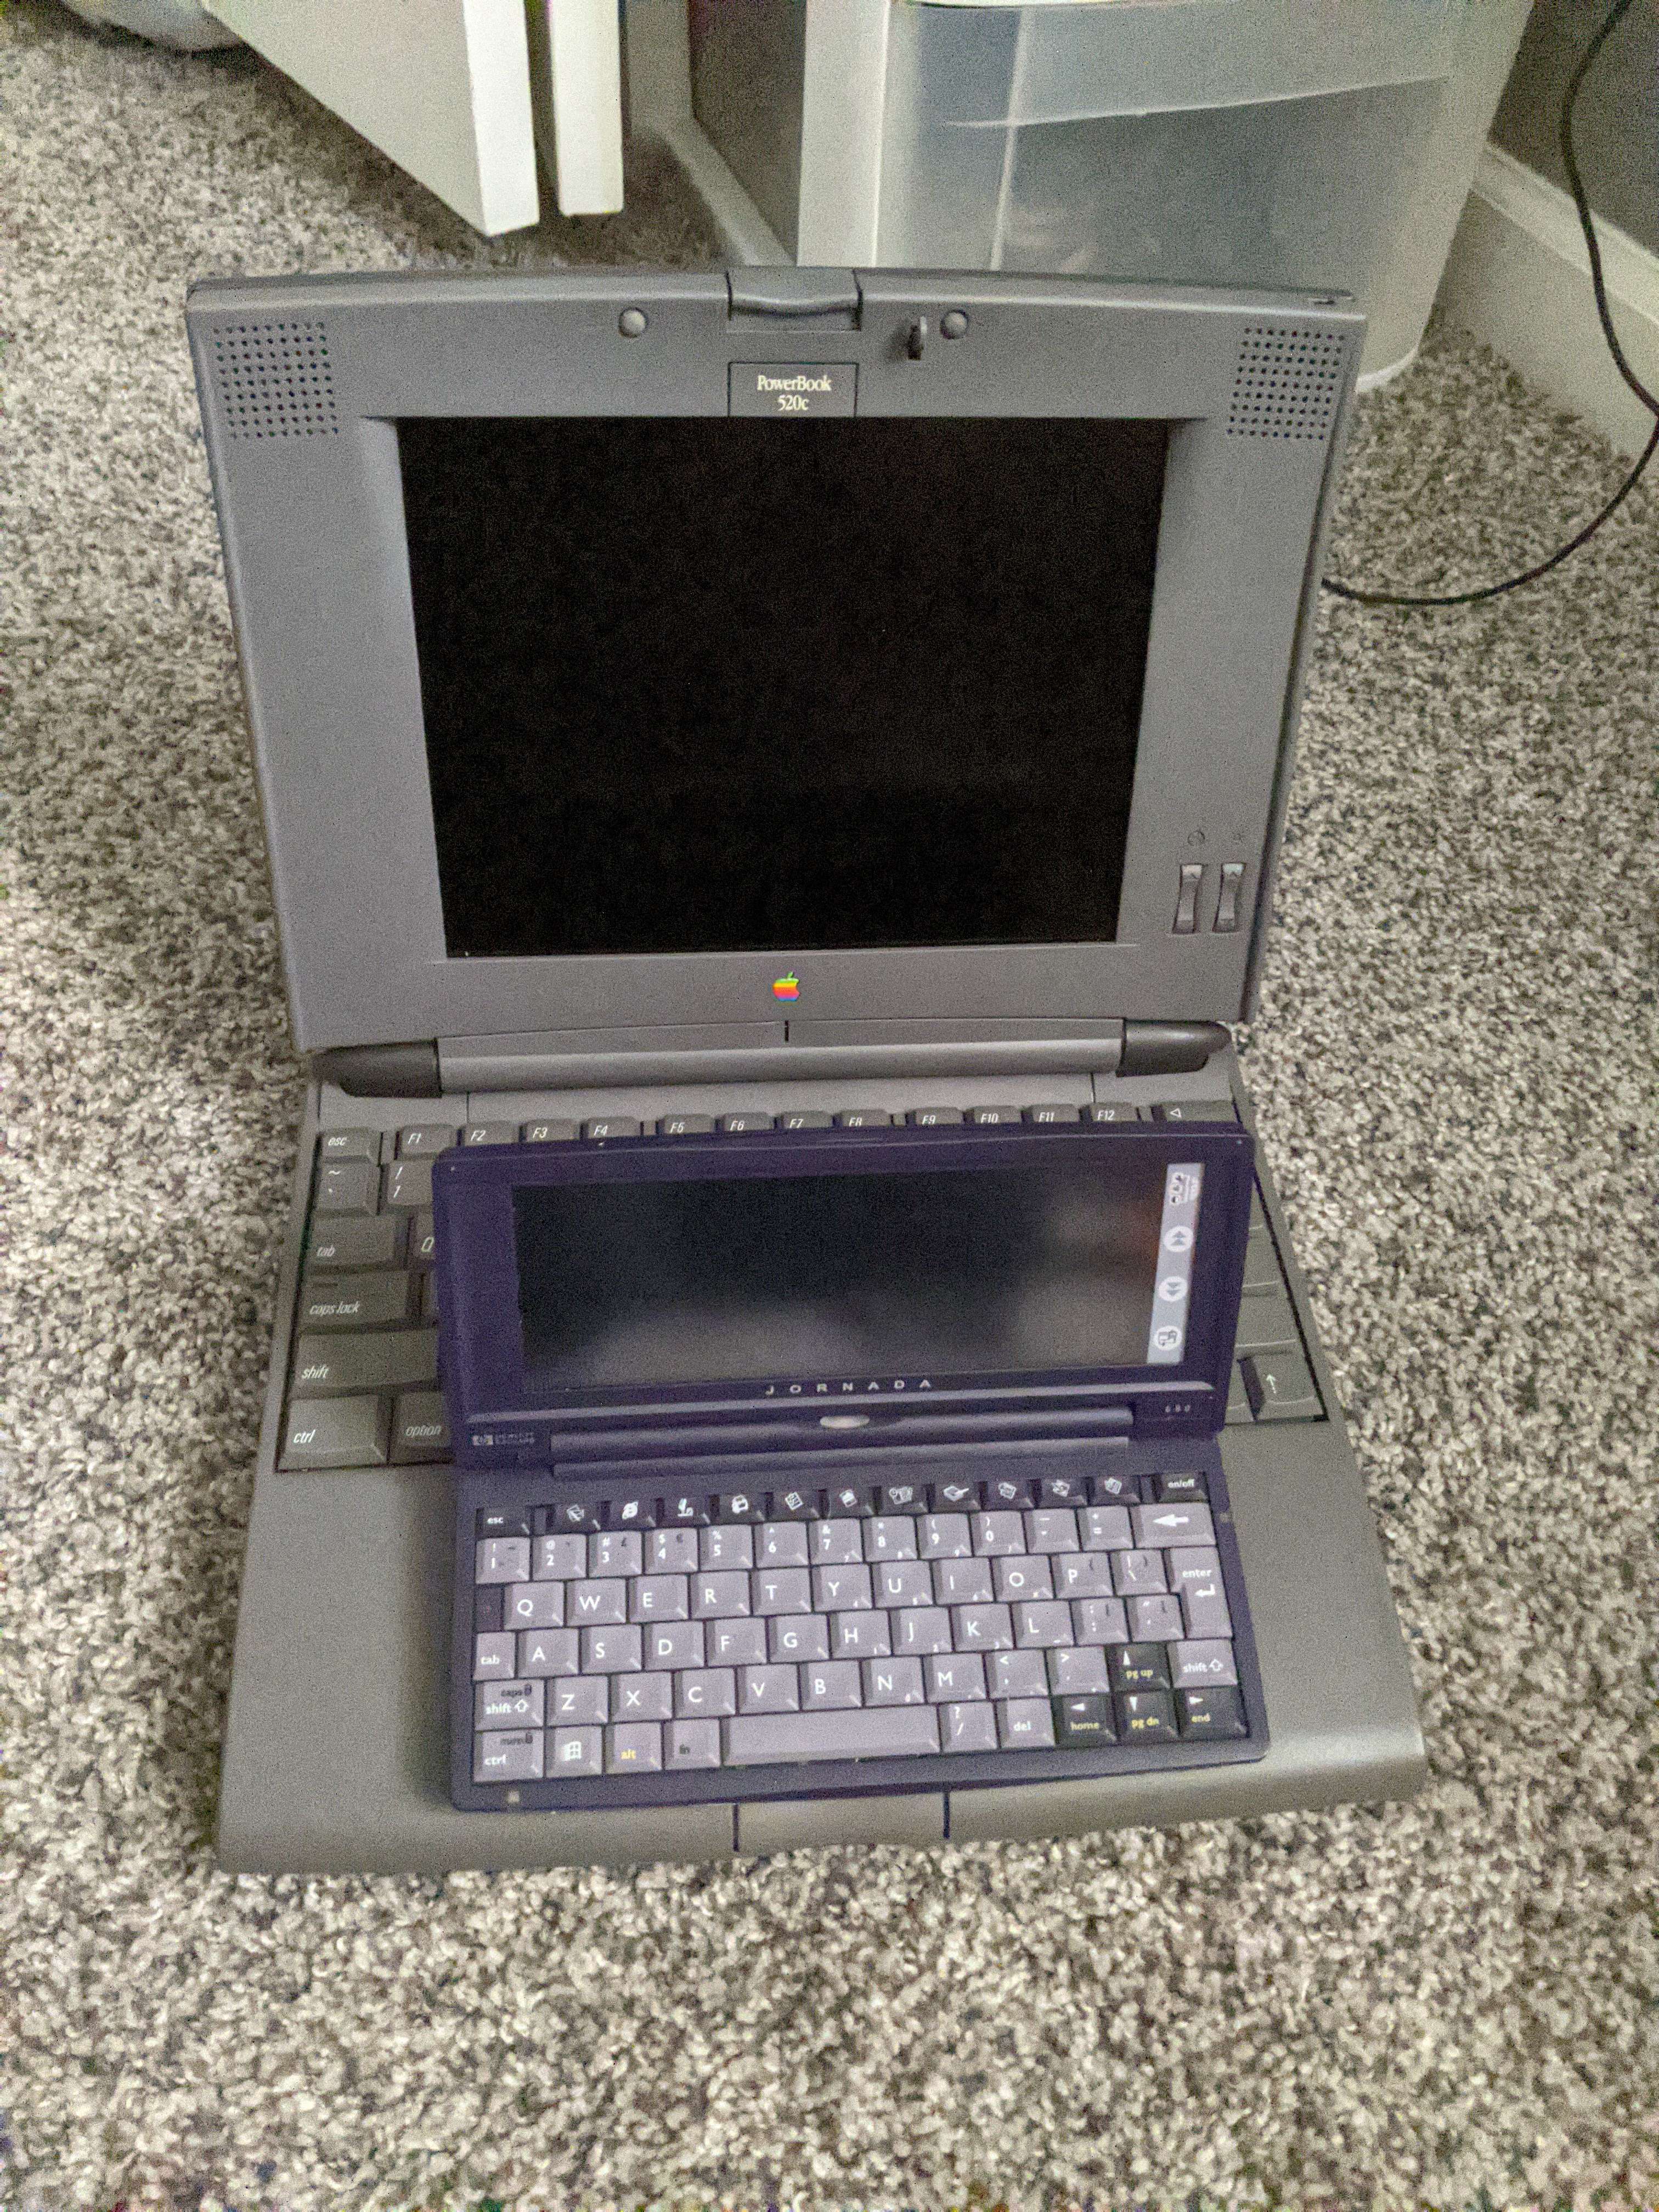 Little guy, PowerBook 520c for scale